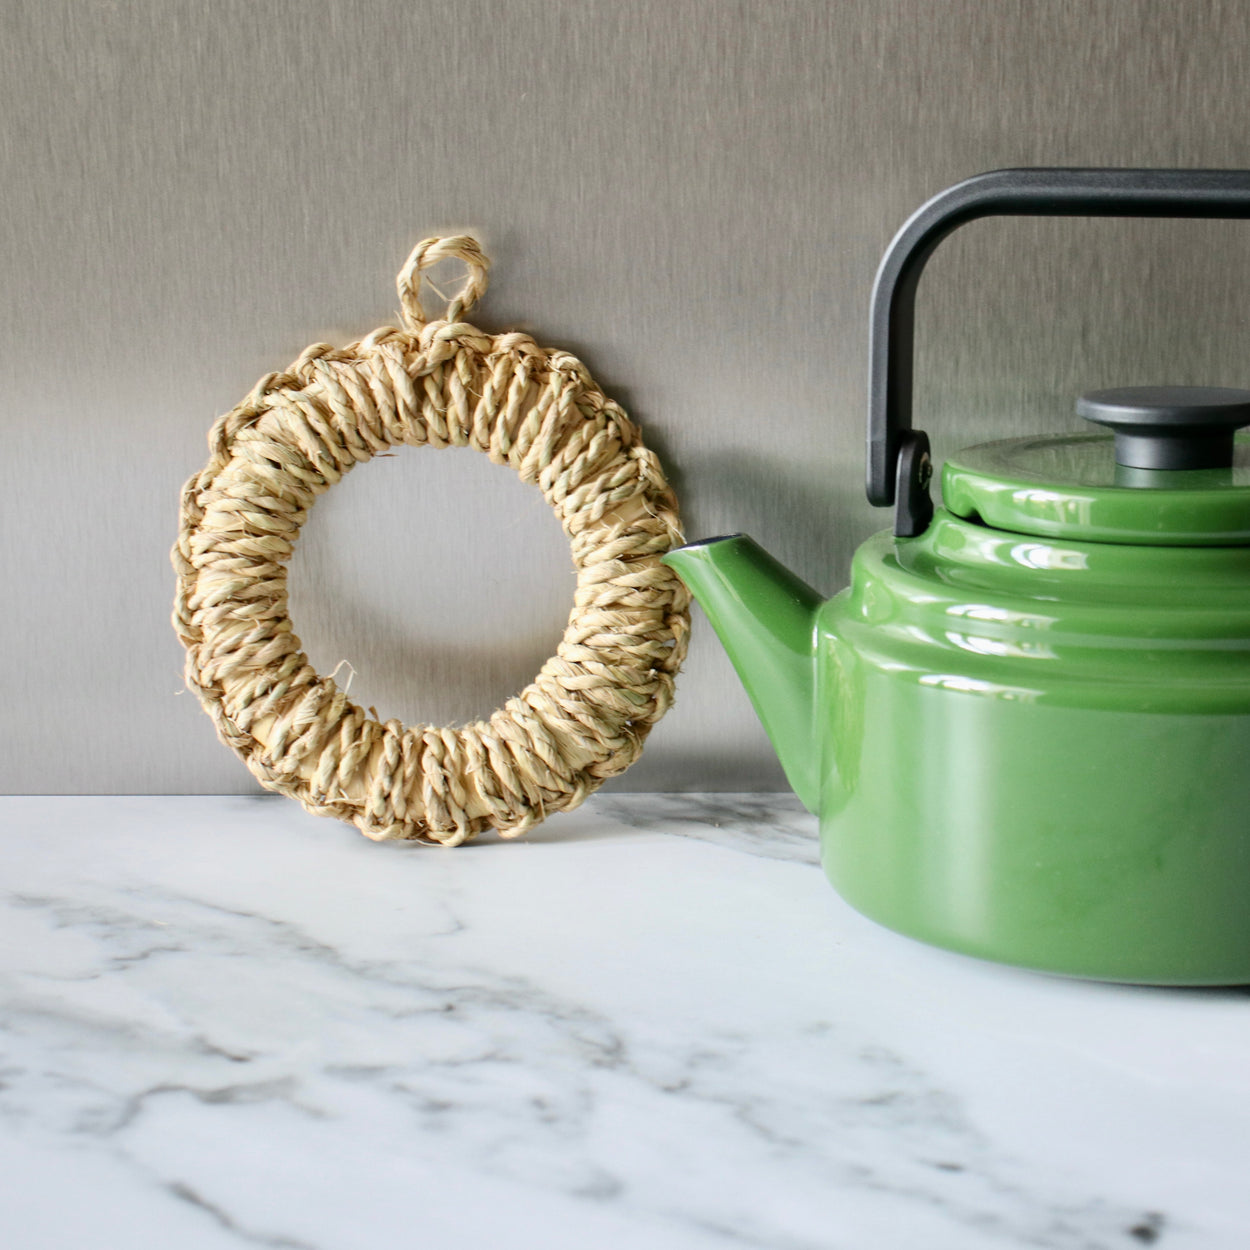 Japanese Woven Pot Holder leaning on marble bench with green Amu kettle.